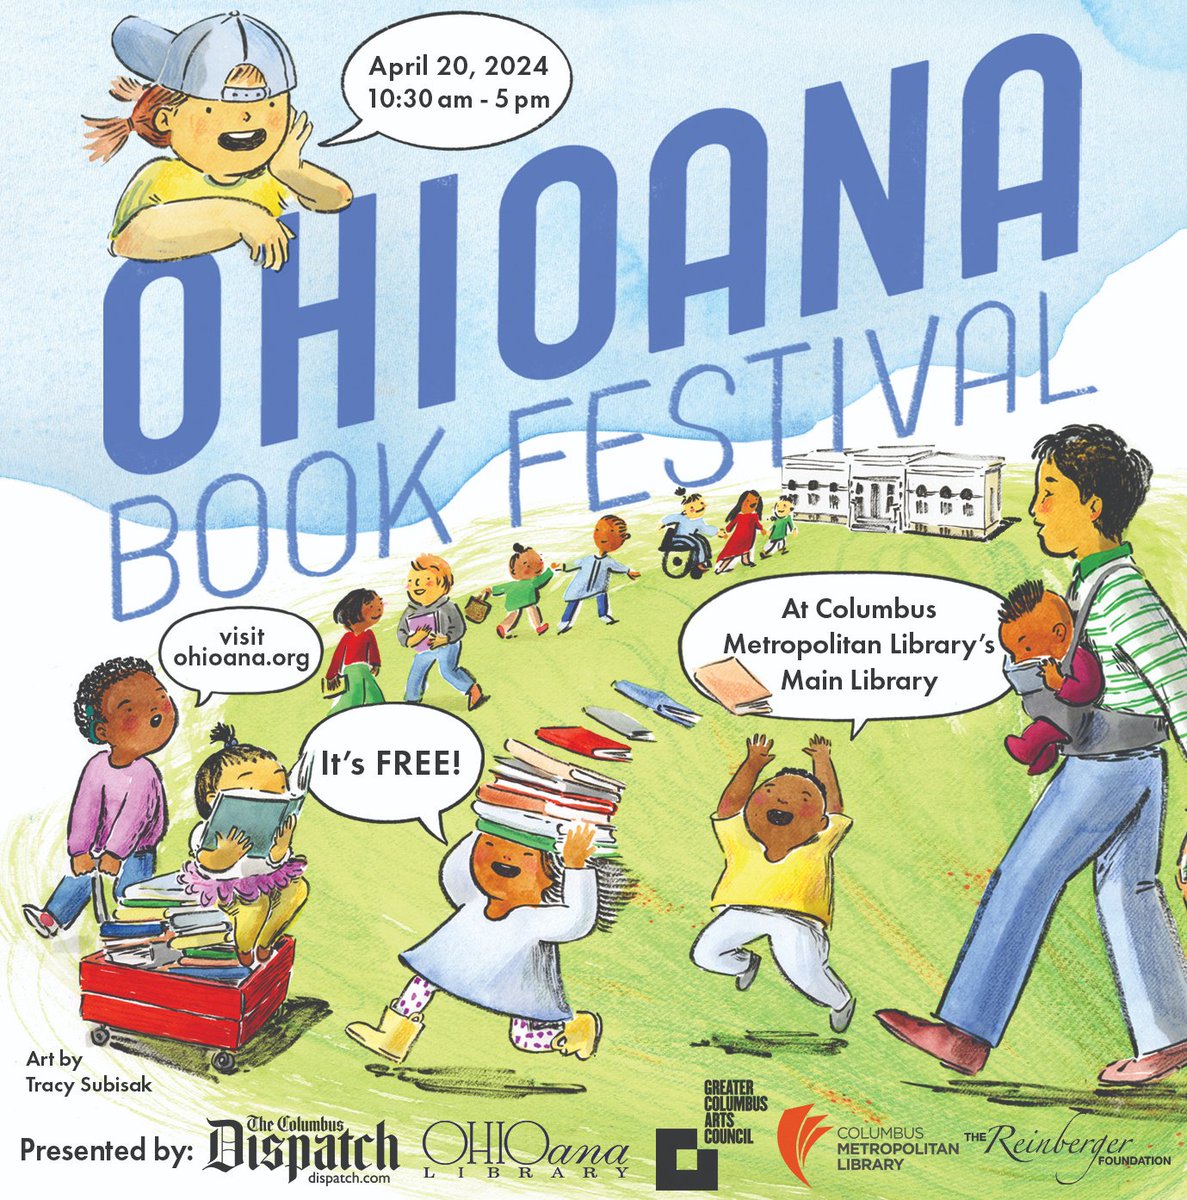 Save the date. The 17th annual @Ohioana Book Festival is 10:30 am EST, Saturday, 4/20 at the Columbus Metropolitan Library’s Main Branch. Free & open to the public. For details & a list of authors, ohioana.org/programs/ohioa…. @ColumbusLibrary #OhioanaBookFestival #BookEvent